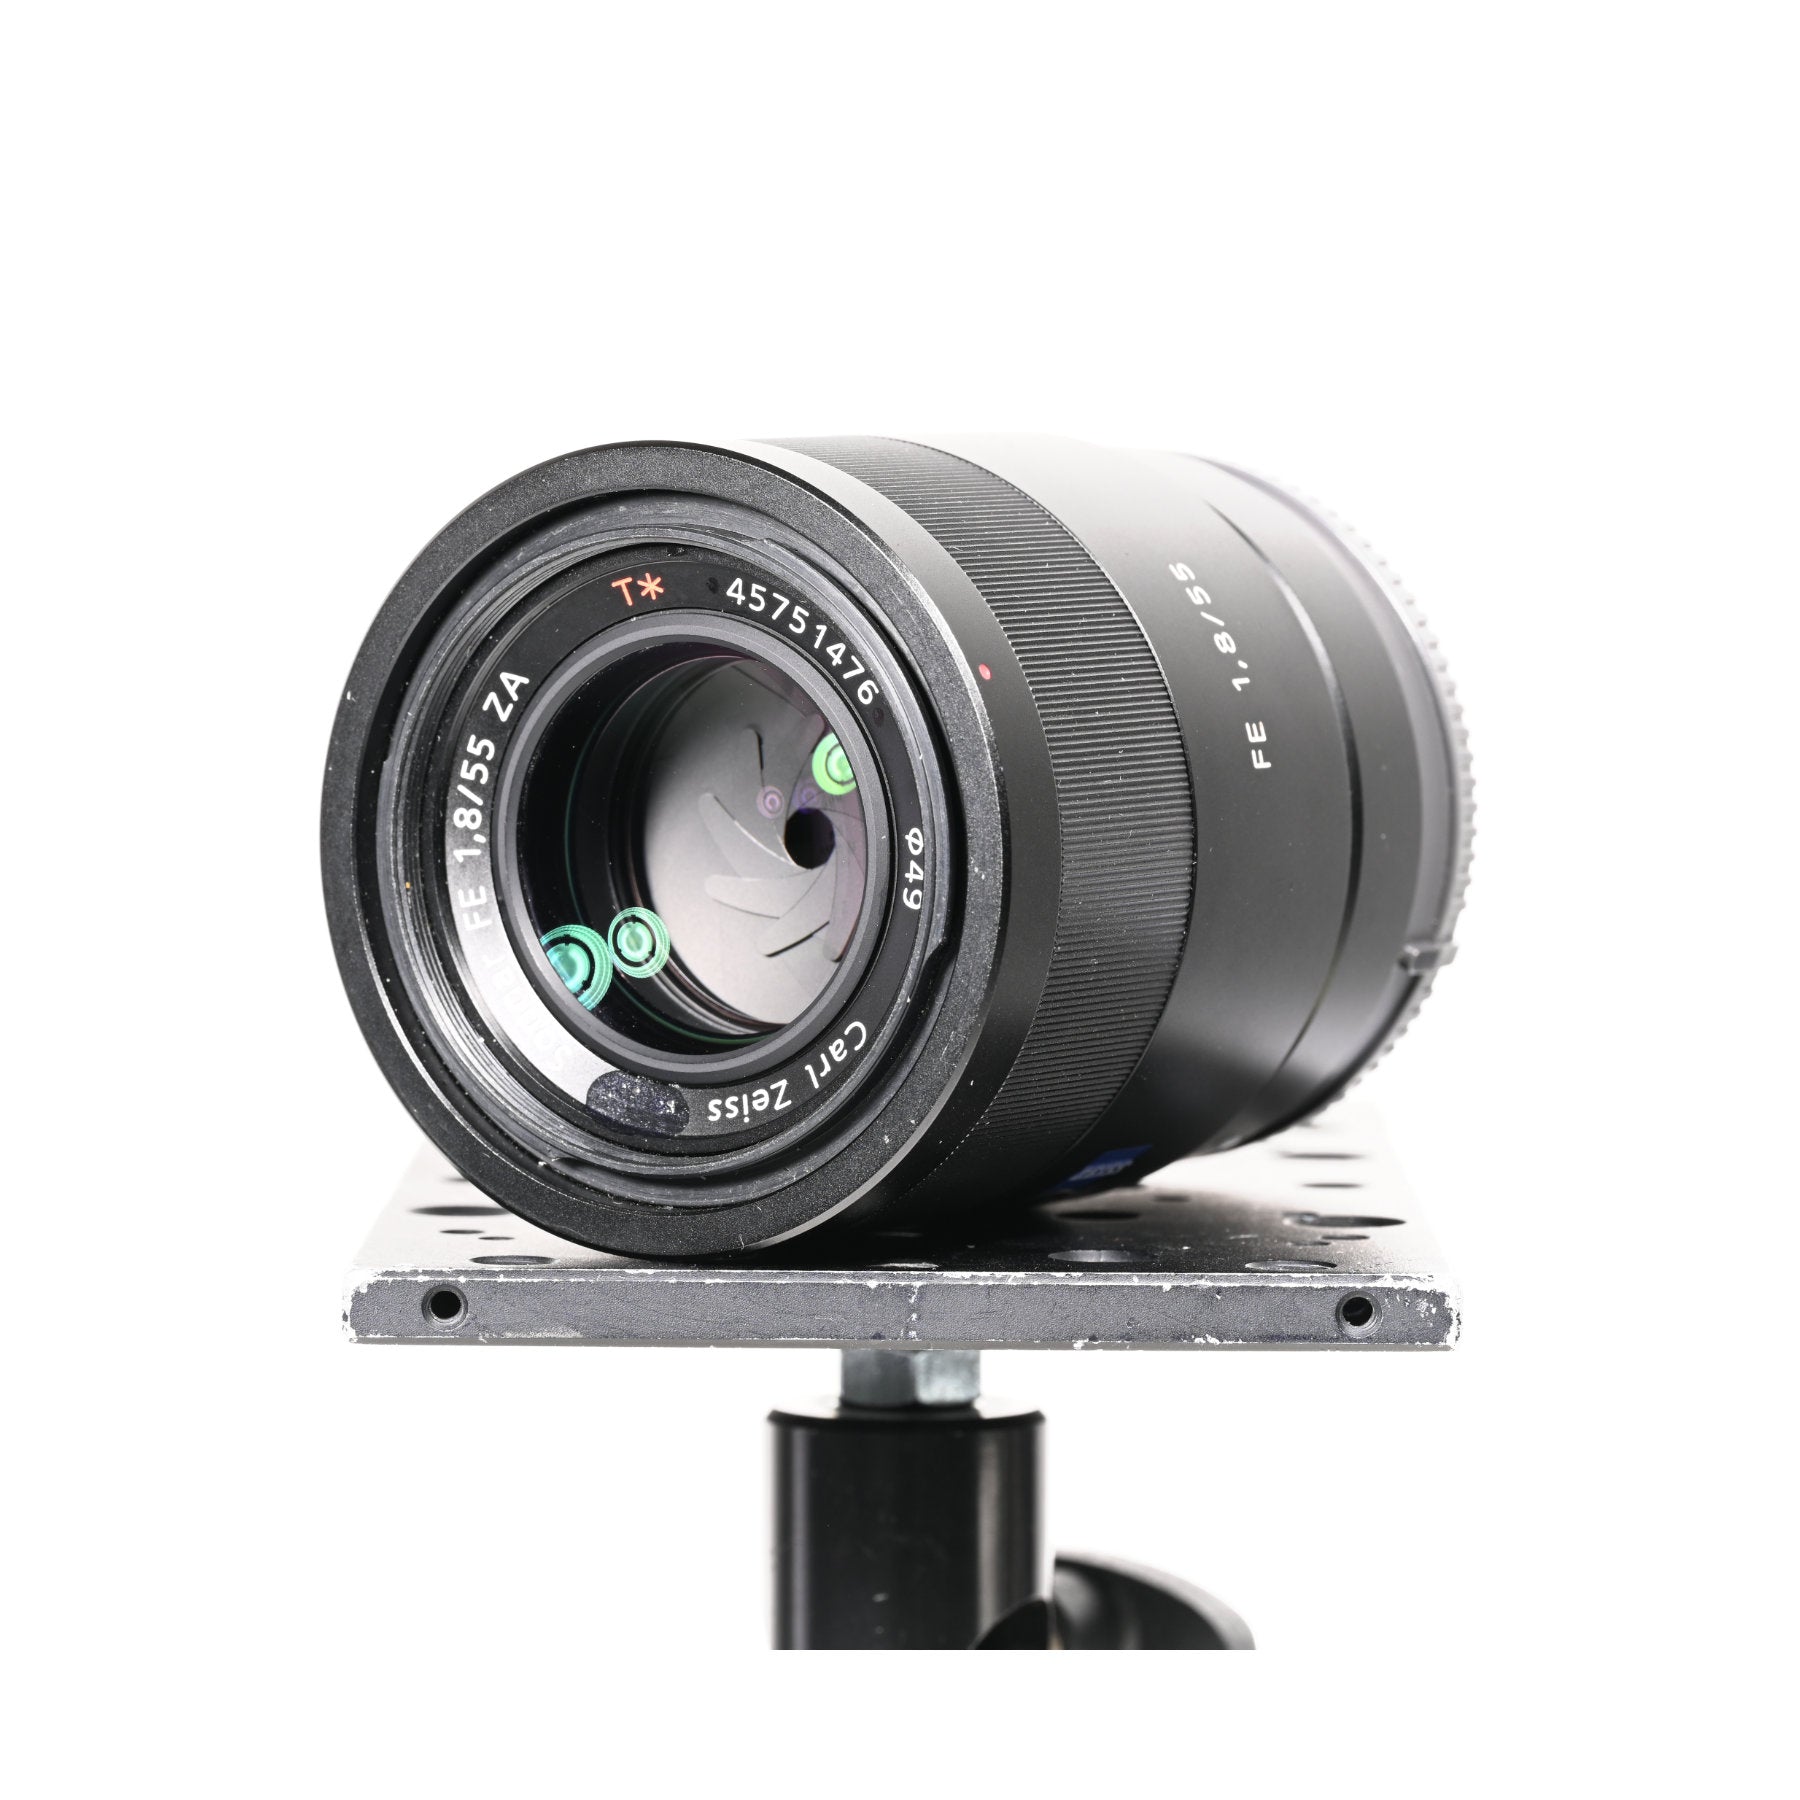 Buy Sony Zeiss 55mm Sonnar T* f1.8 Lens - Ex Rental second hand at Topic Store